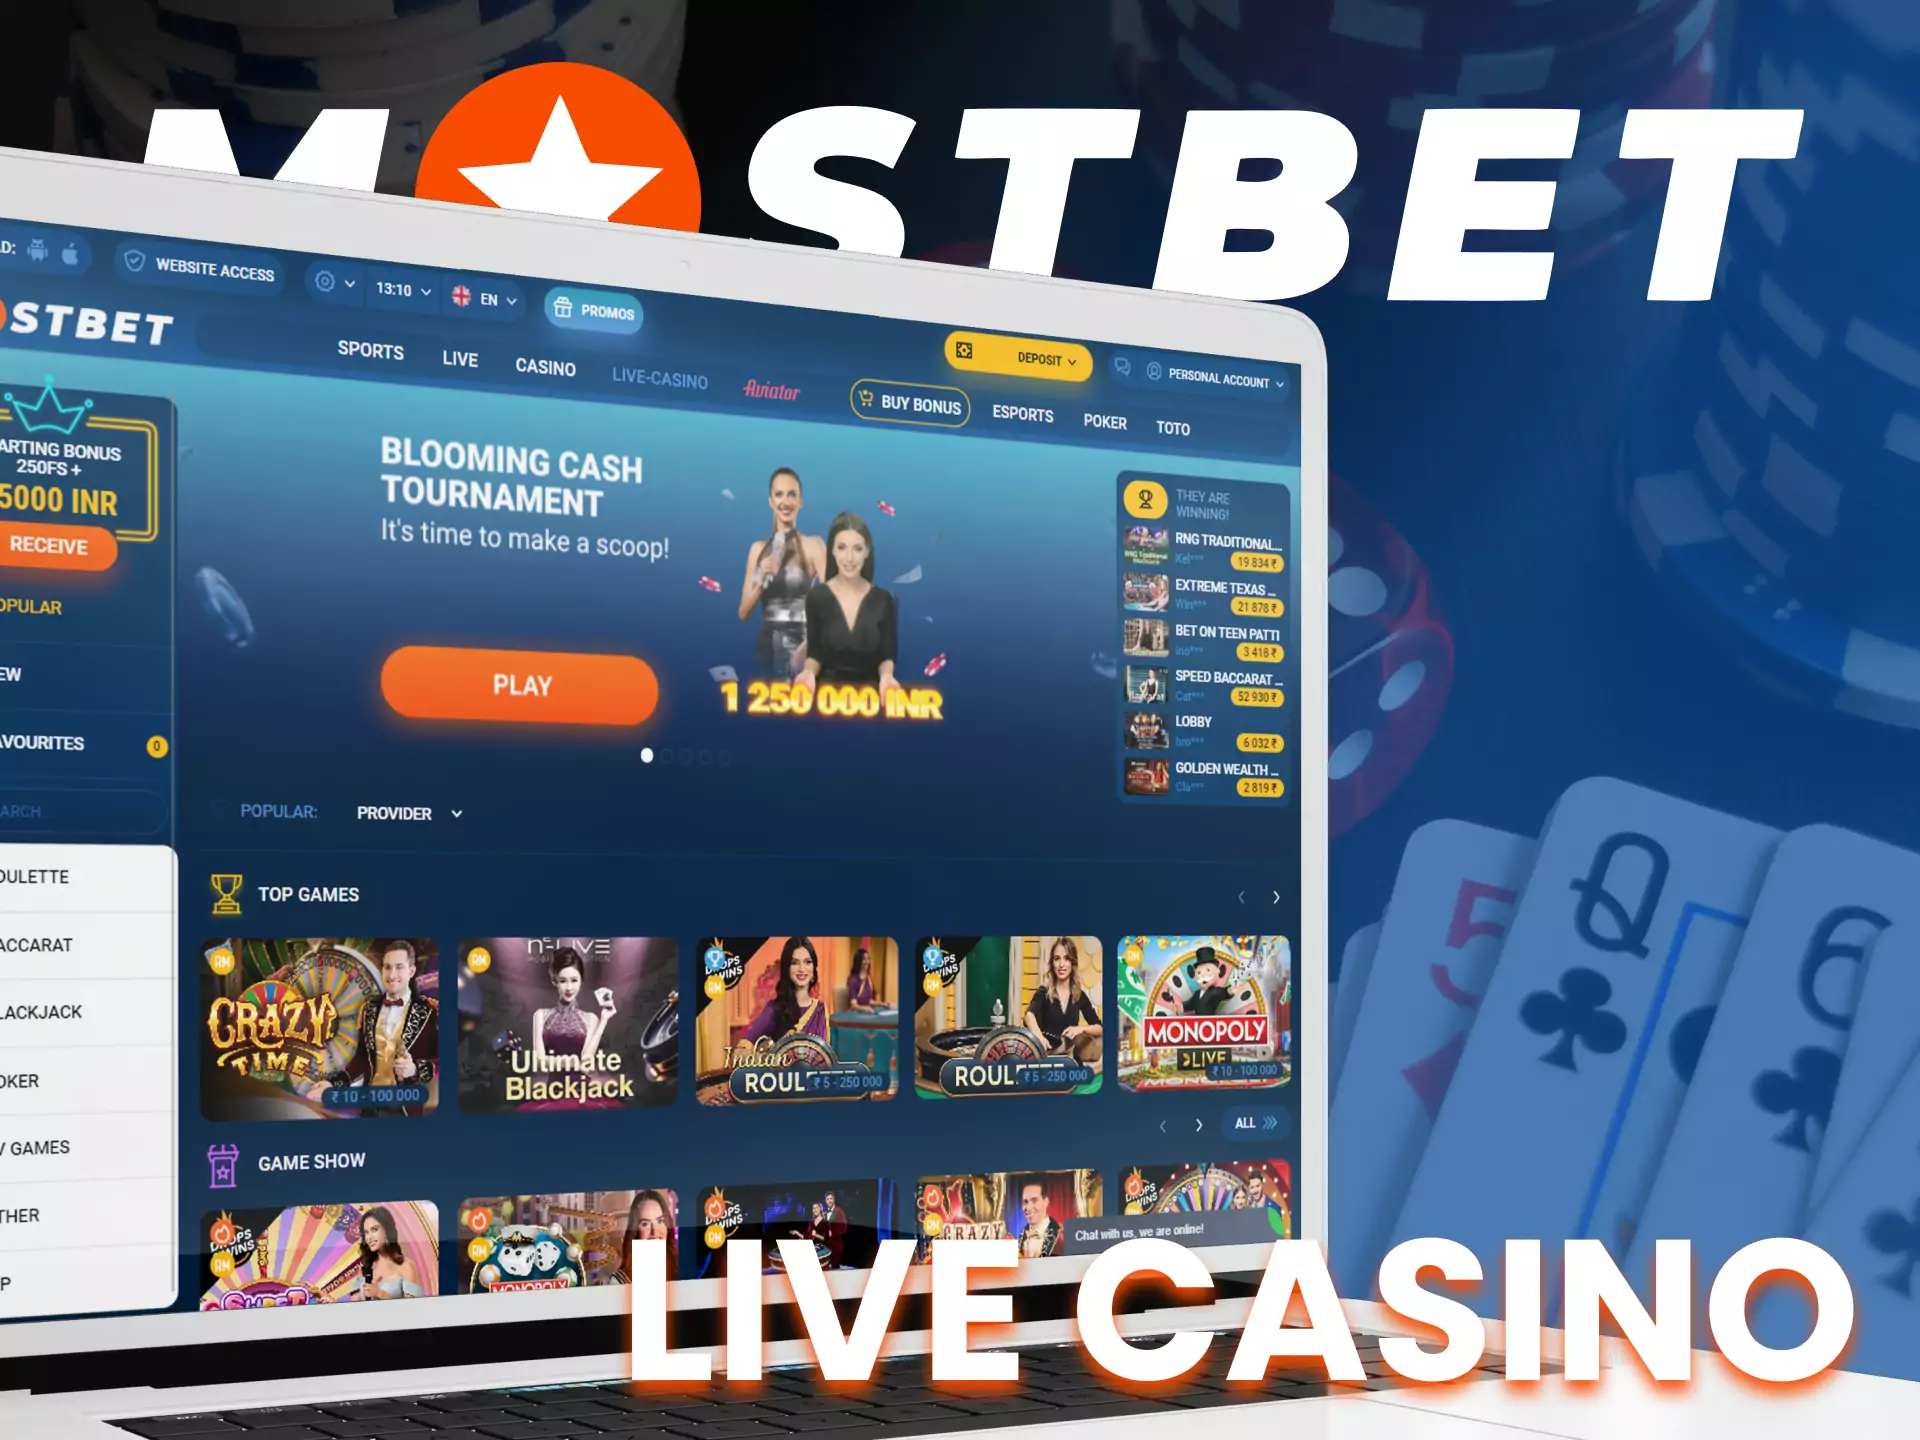 At Mostbet, you can play at the live casino.